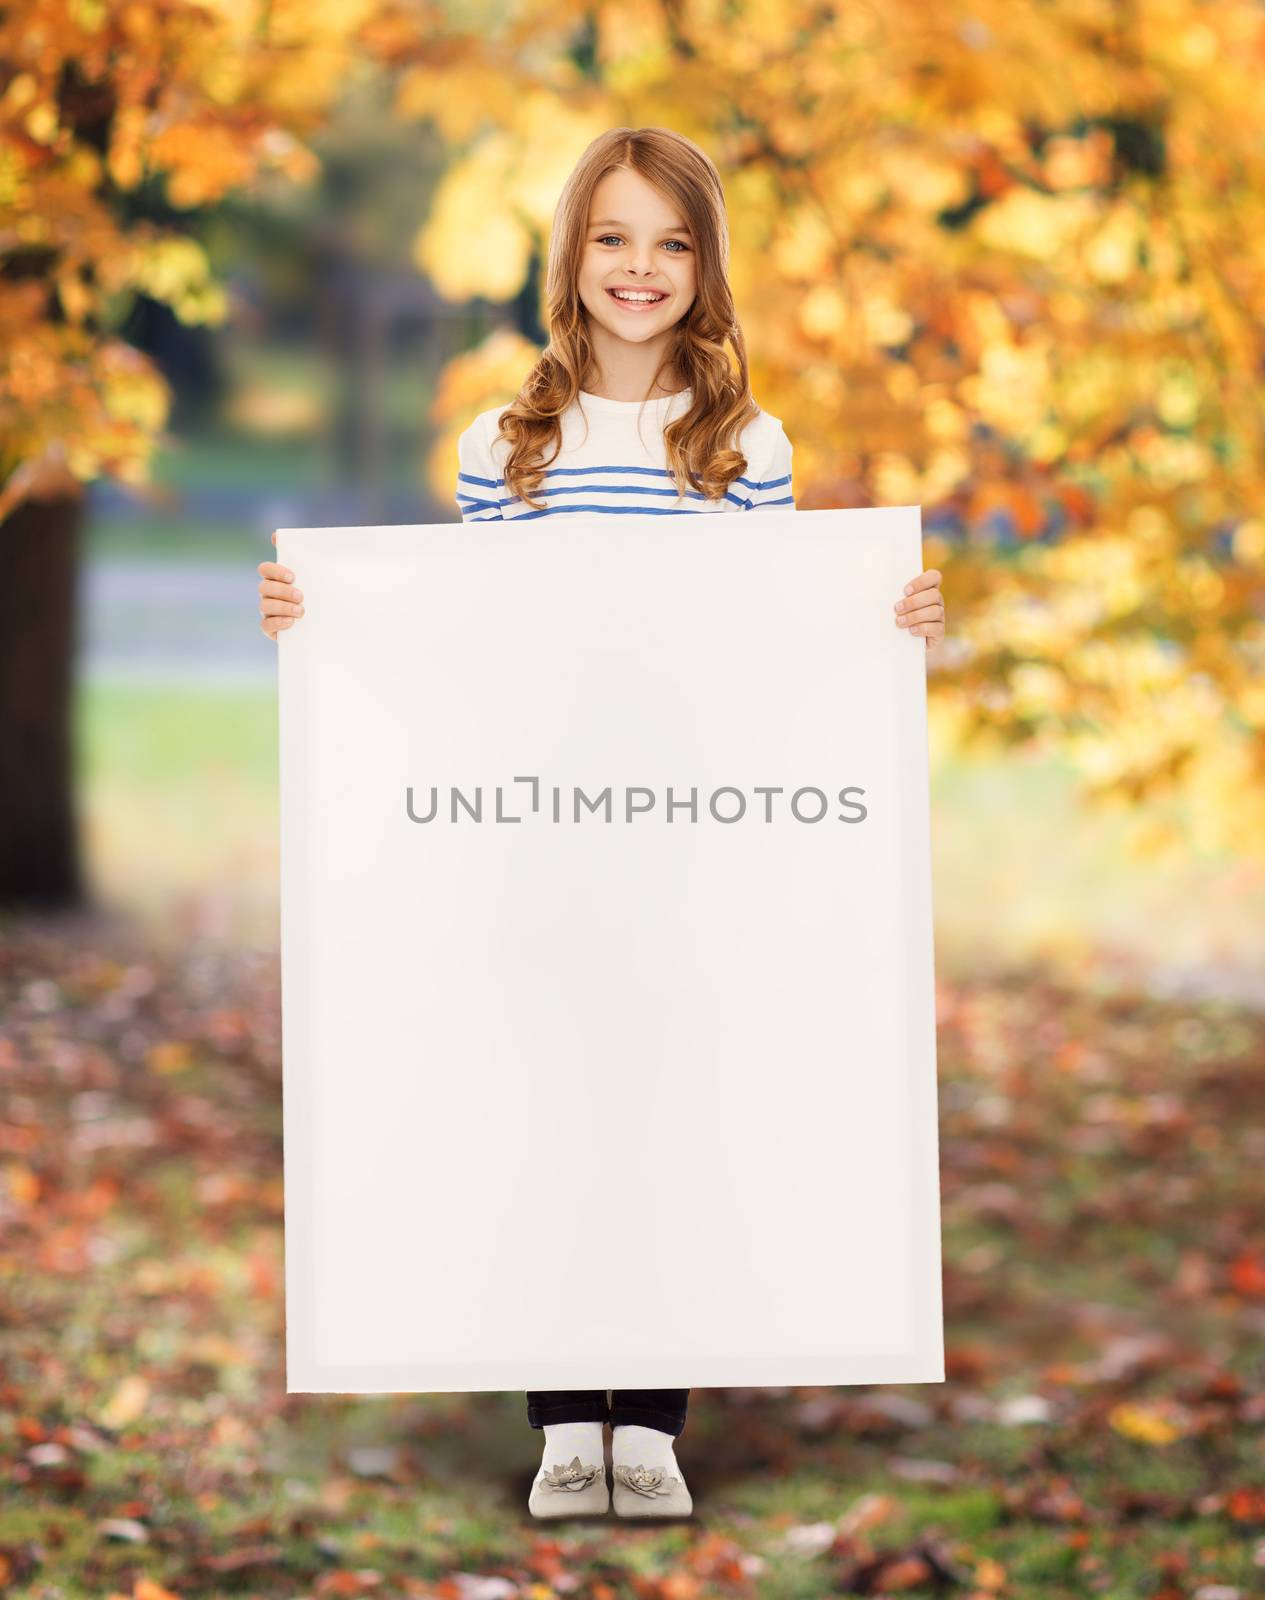 education and blank board concept - little girl with blank white board